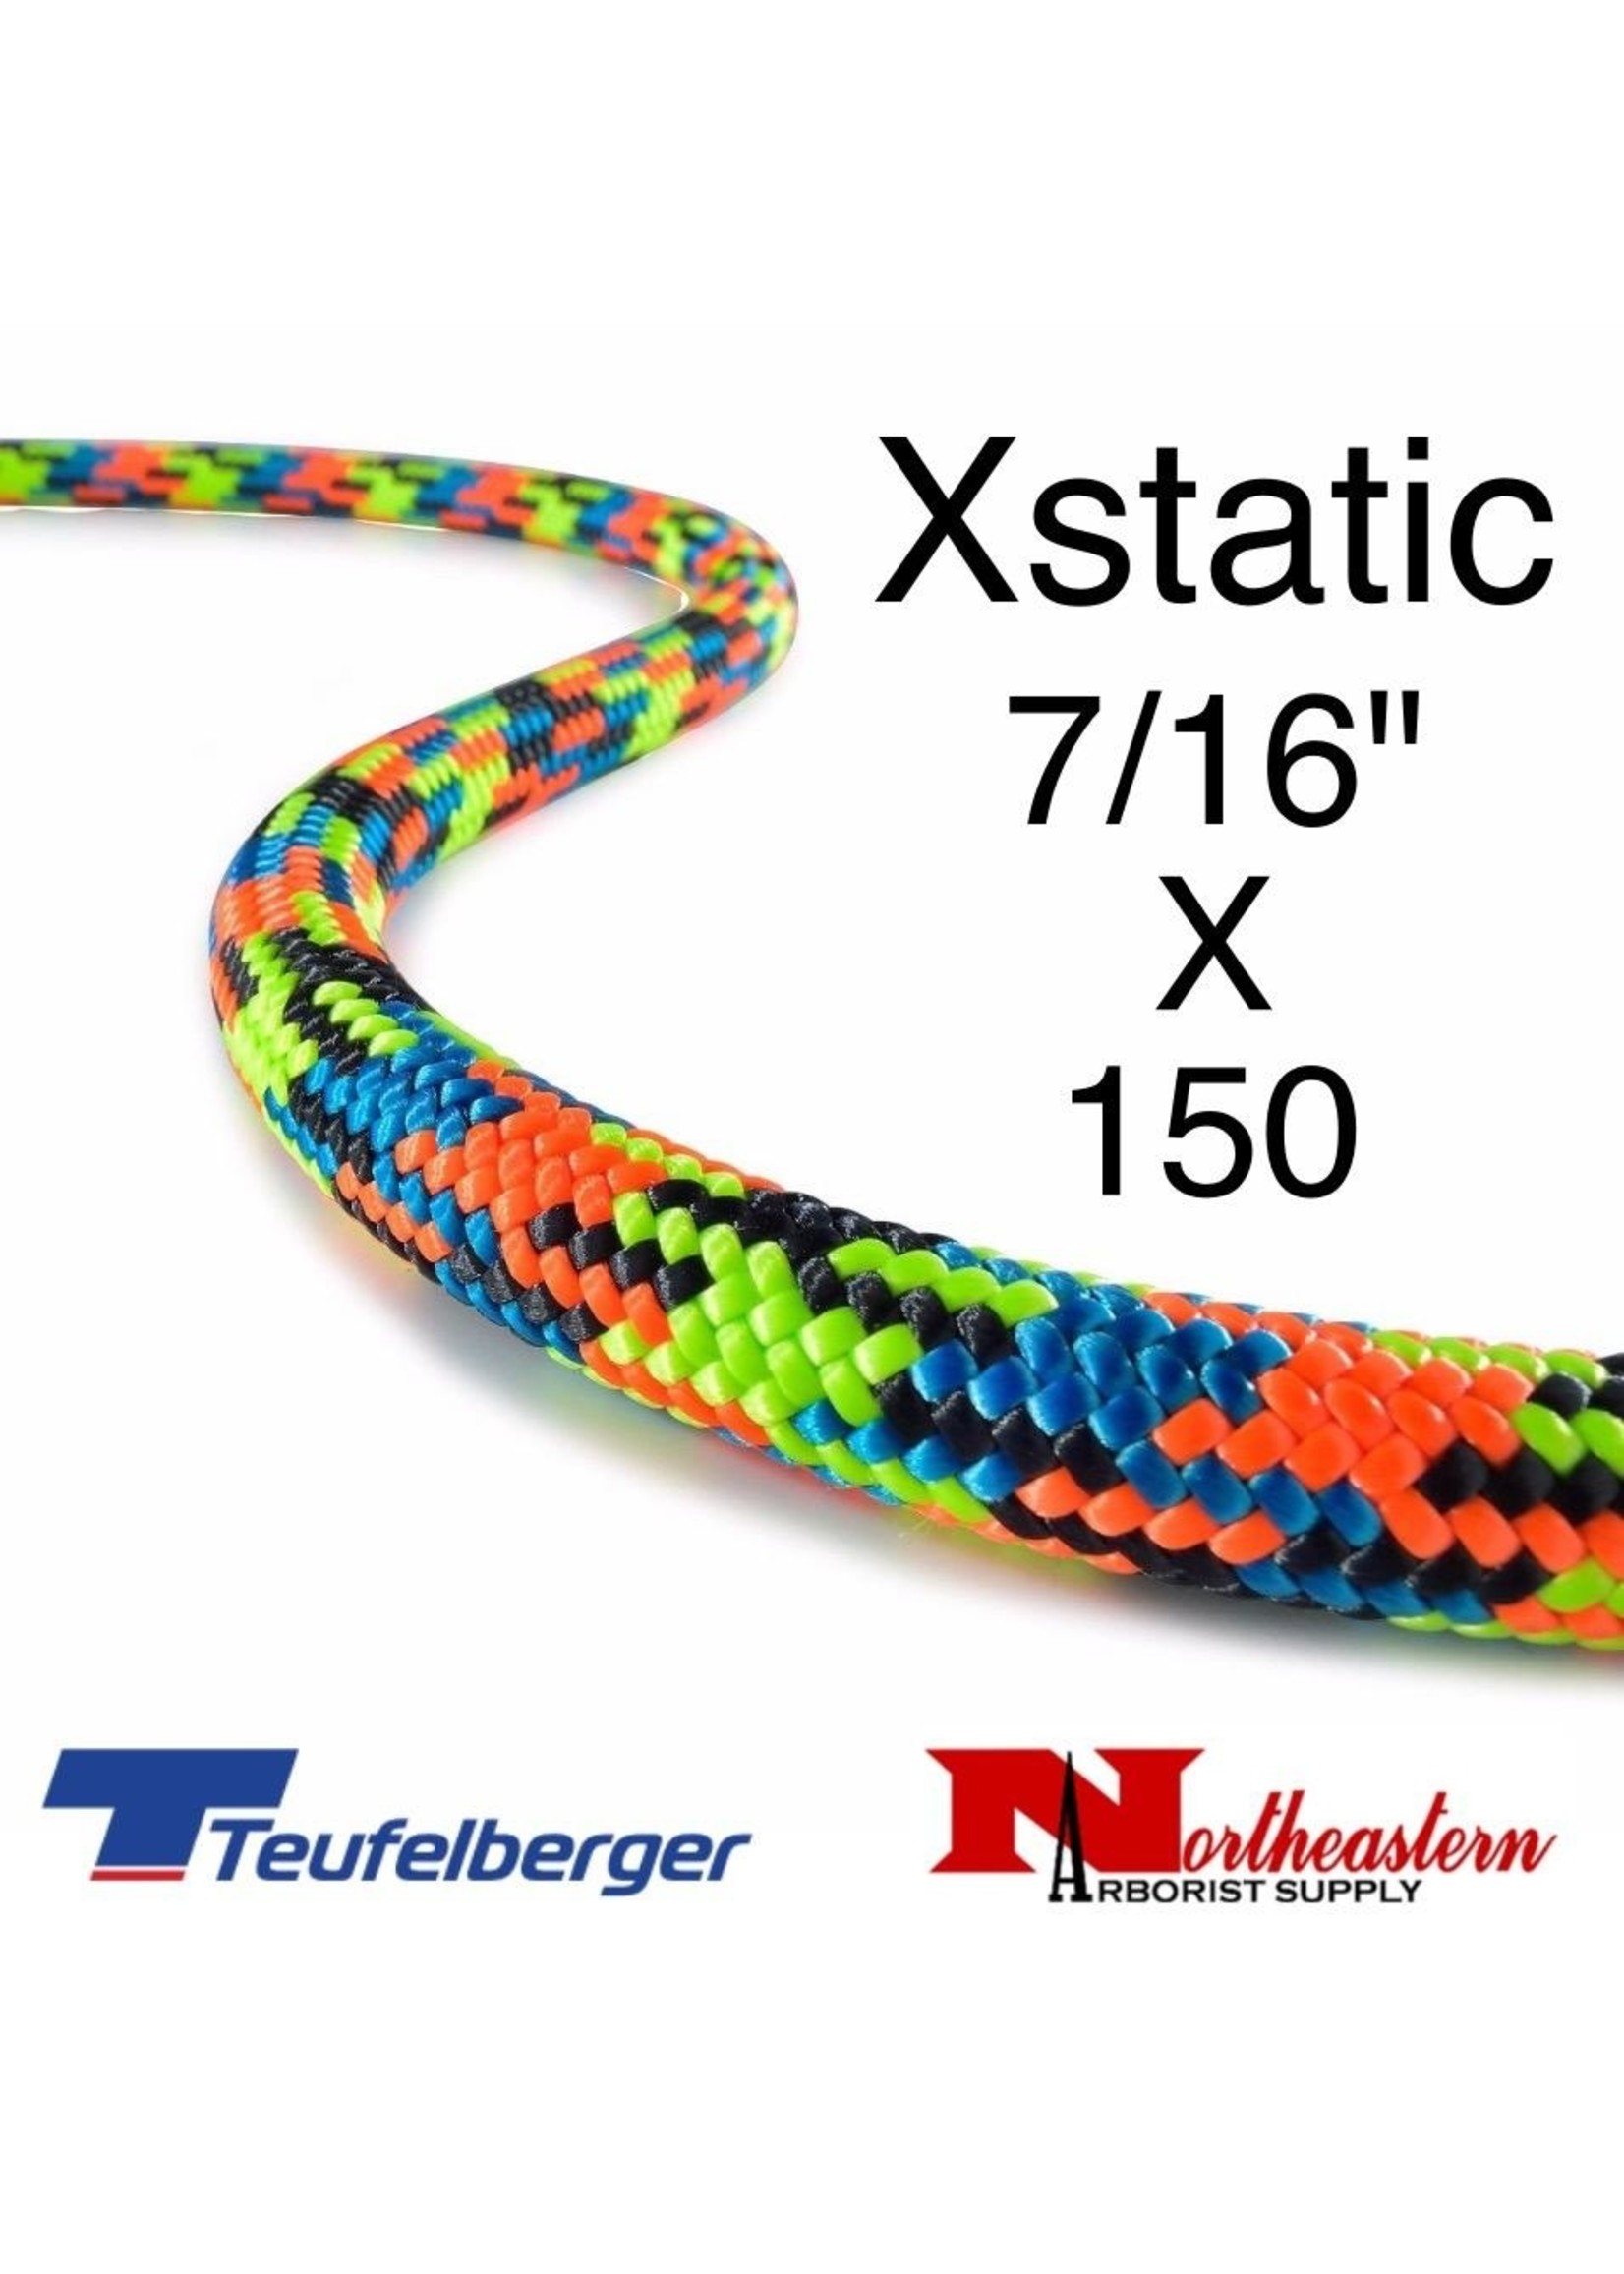 Teufelberger Xstatic, Extra Static SRT Rope, with Sewn Eye One End, 11.7mm (7/16") x 150'